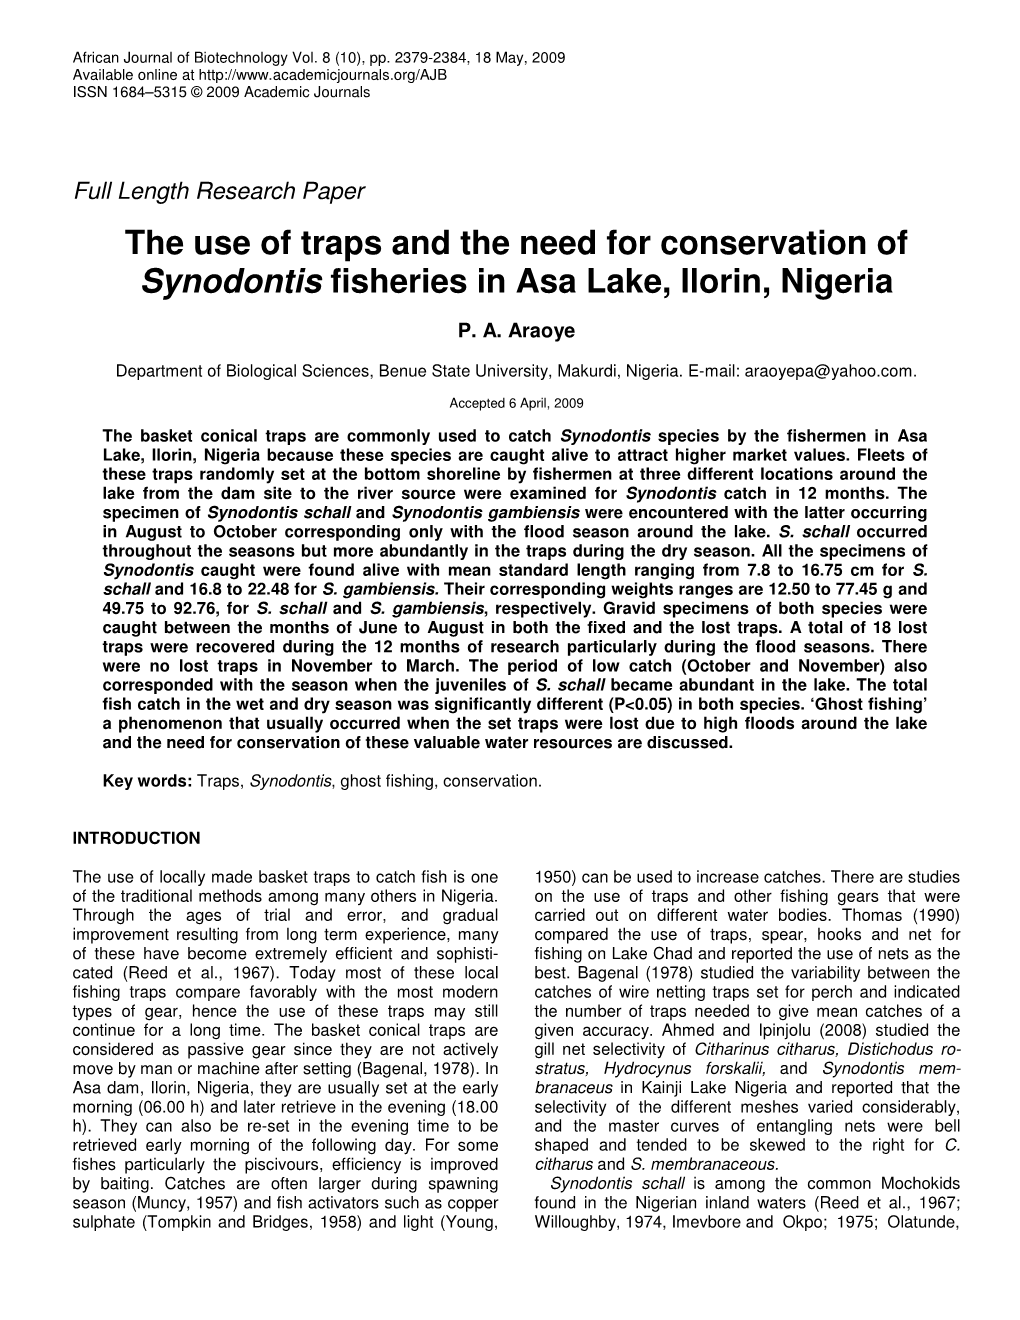 The Use of Traps and the Need for Conservation of Synodontis Fisheries in Asa Lake, Ilorin, Nigeria